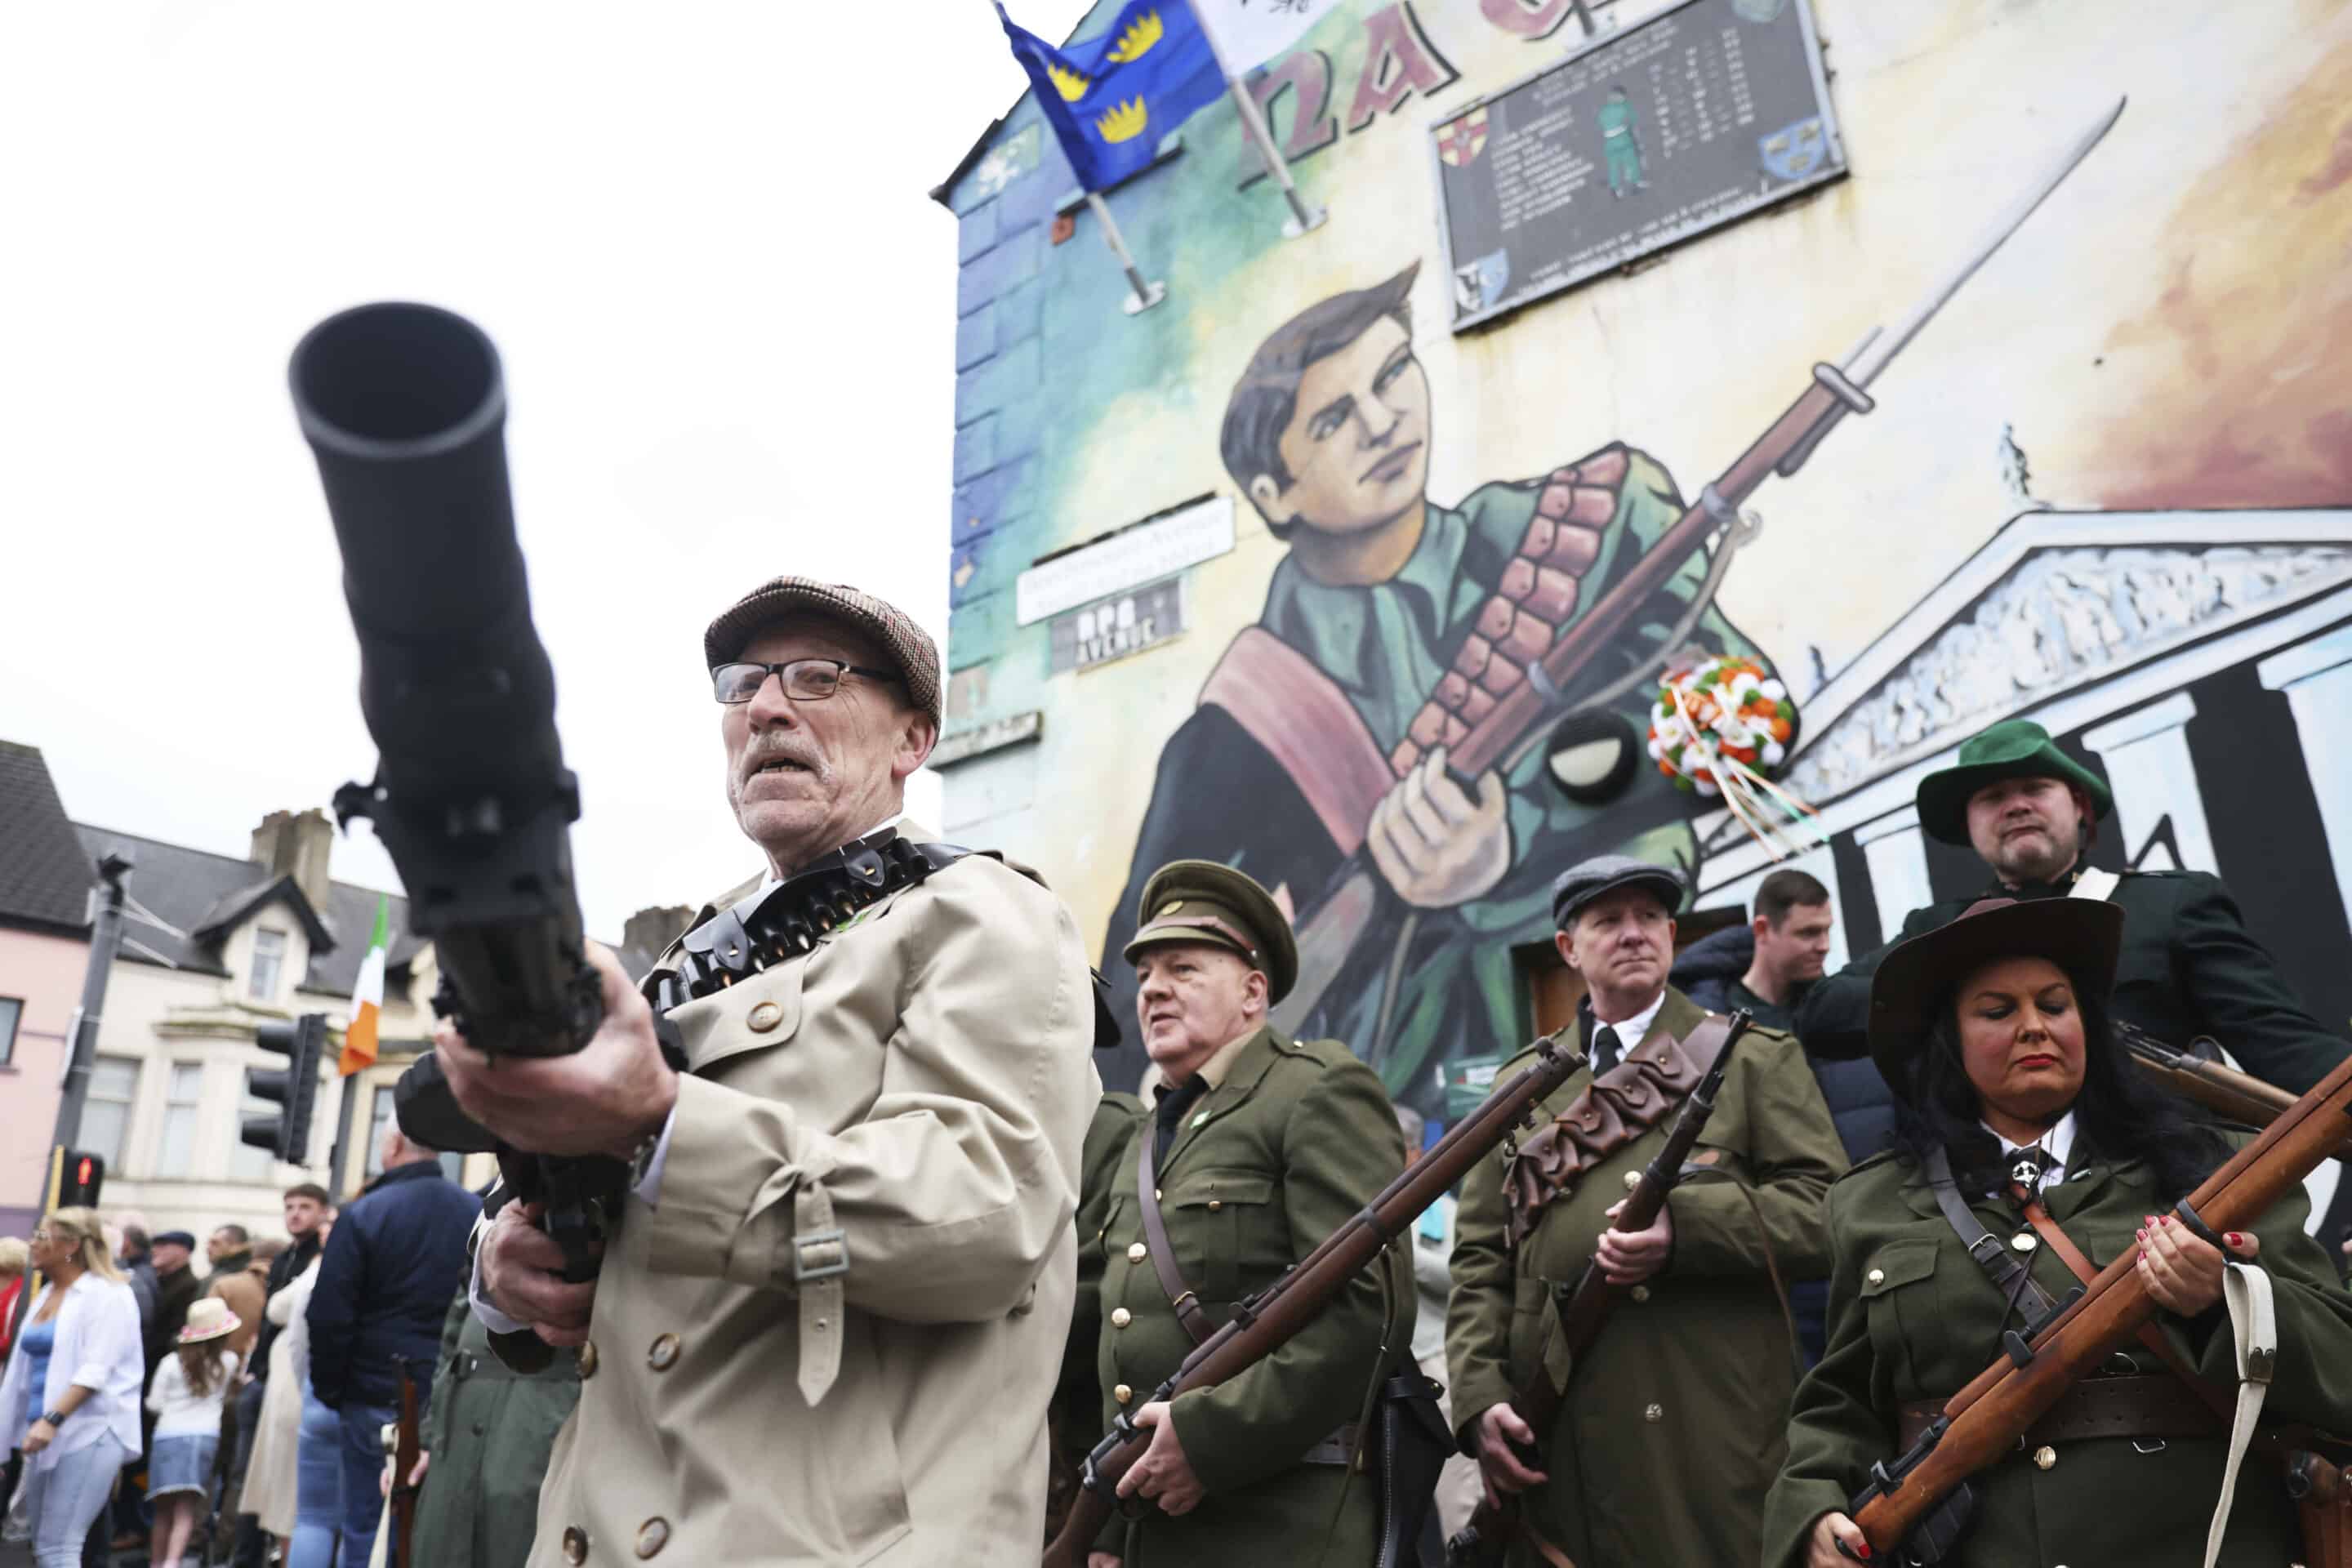 A Republican parade organised by Sinn Fein to mark the anniversary of the 1916 Easter Rising, in Belfast, Northern Ireland, Sunday April 9, 2023. (AP Photo/Peter Morrison)/XPM105/23099543046828-0//2304091712